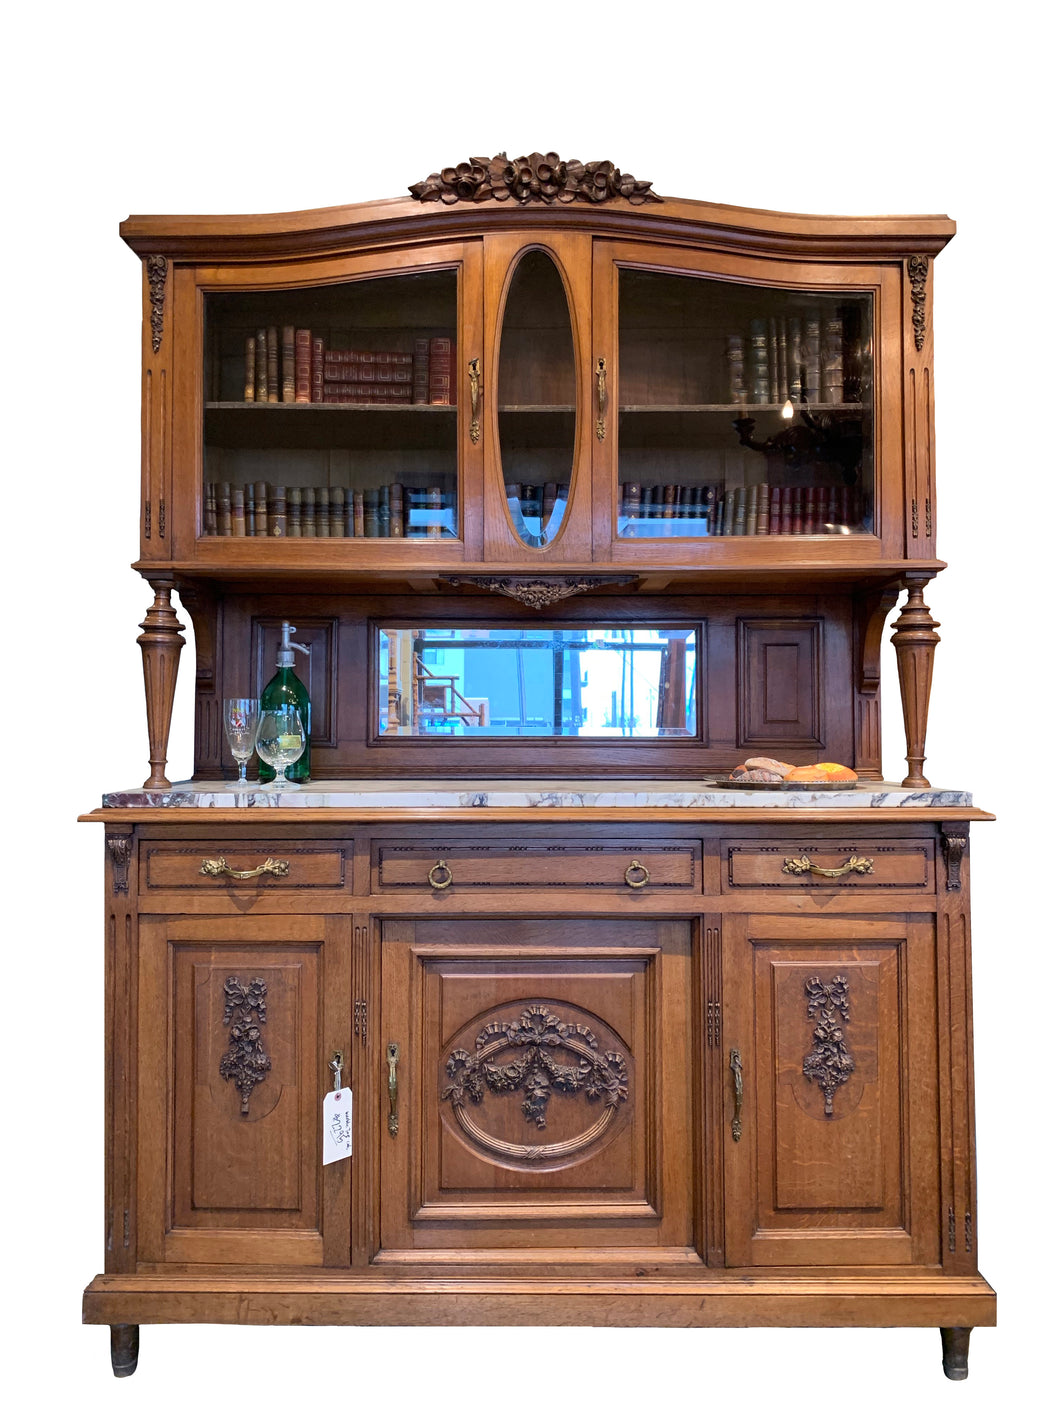 Oak Buffet with Glass Doors and Marble Top comes from Belgium